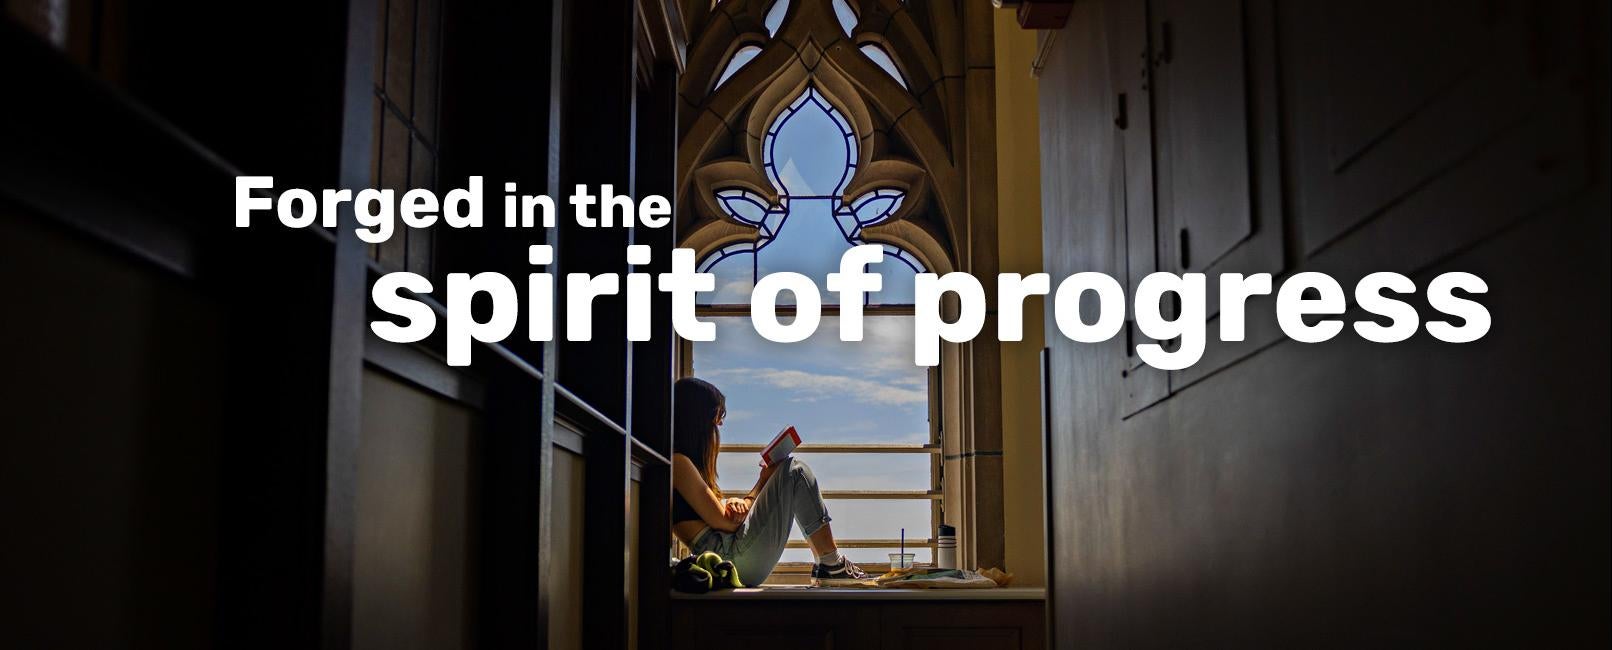 Cathedral window: Forged in the spirit of progress text over image